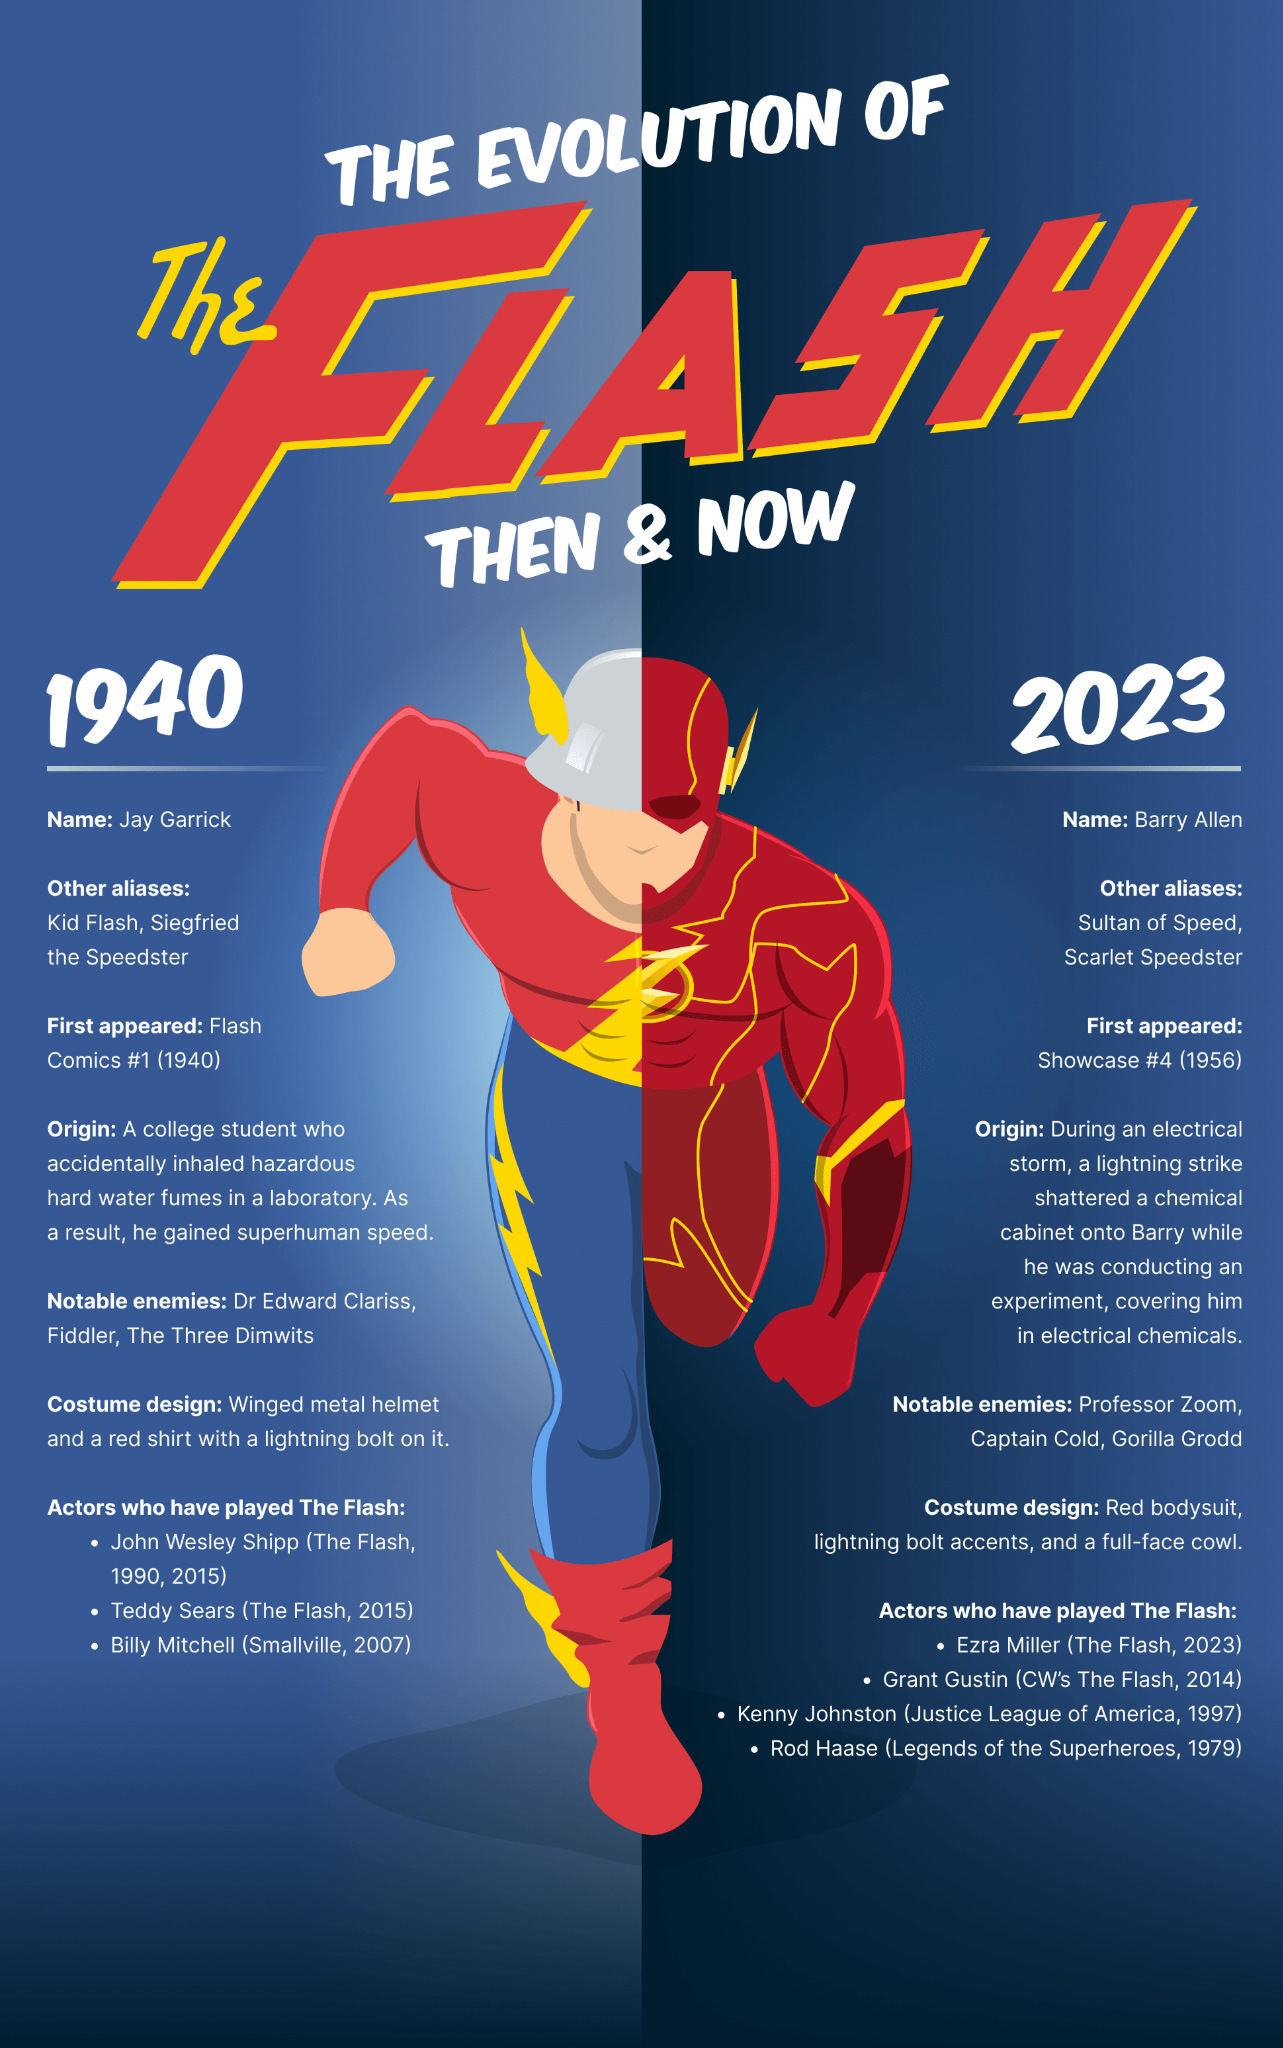 The Impact Of The Flash On The Superhero Genre And Pop Culture ...